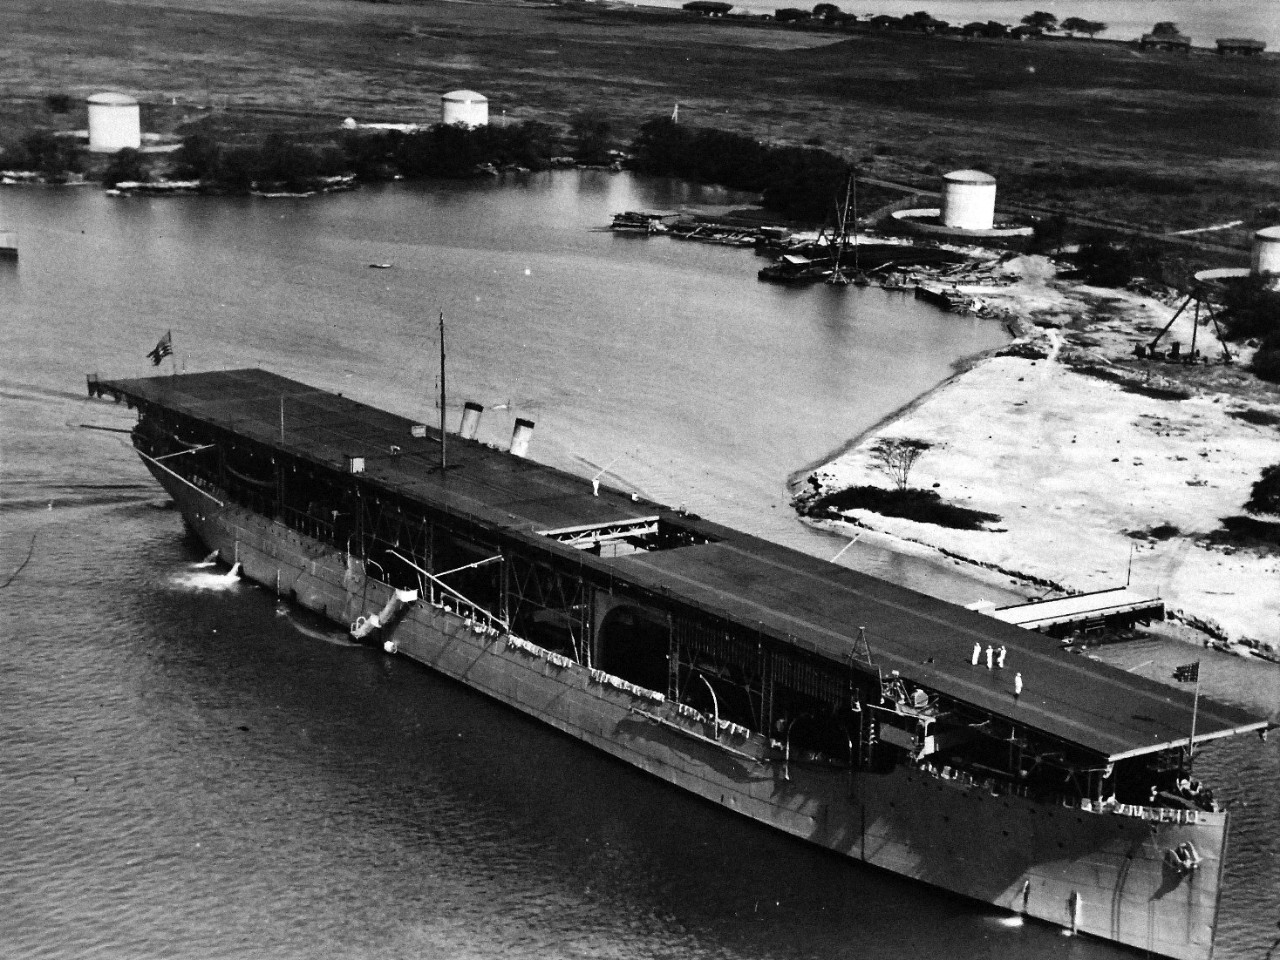 80-G-185927:   USS Langley (CV 1), 1925.   Langley going by the oil docks at Pearl Harbor, Territory of Hawaii, May 4, 1925. Official  U.S. Navy photograph, now in the collections of the National Archives.  (2015/12/22).